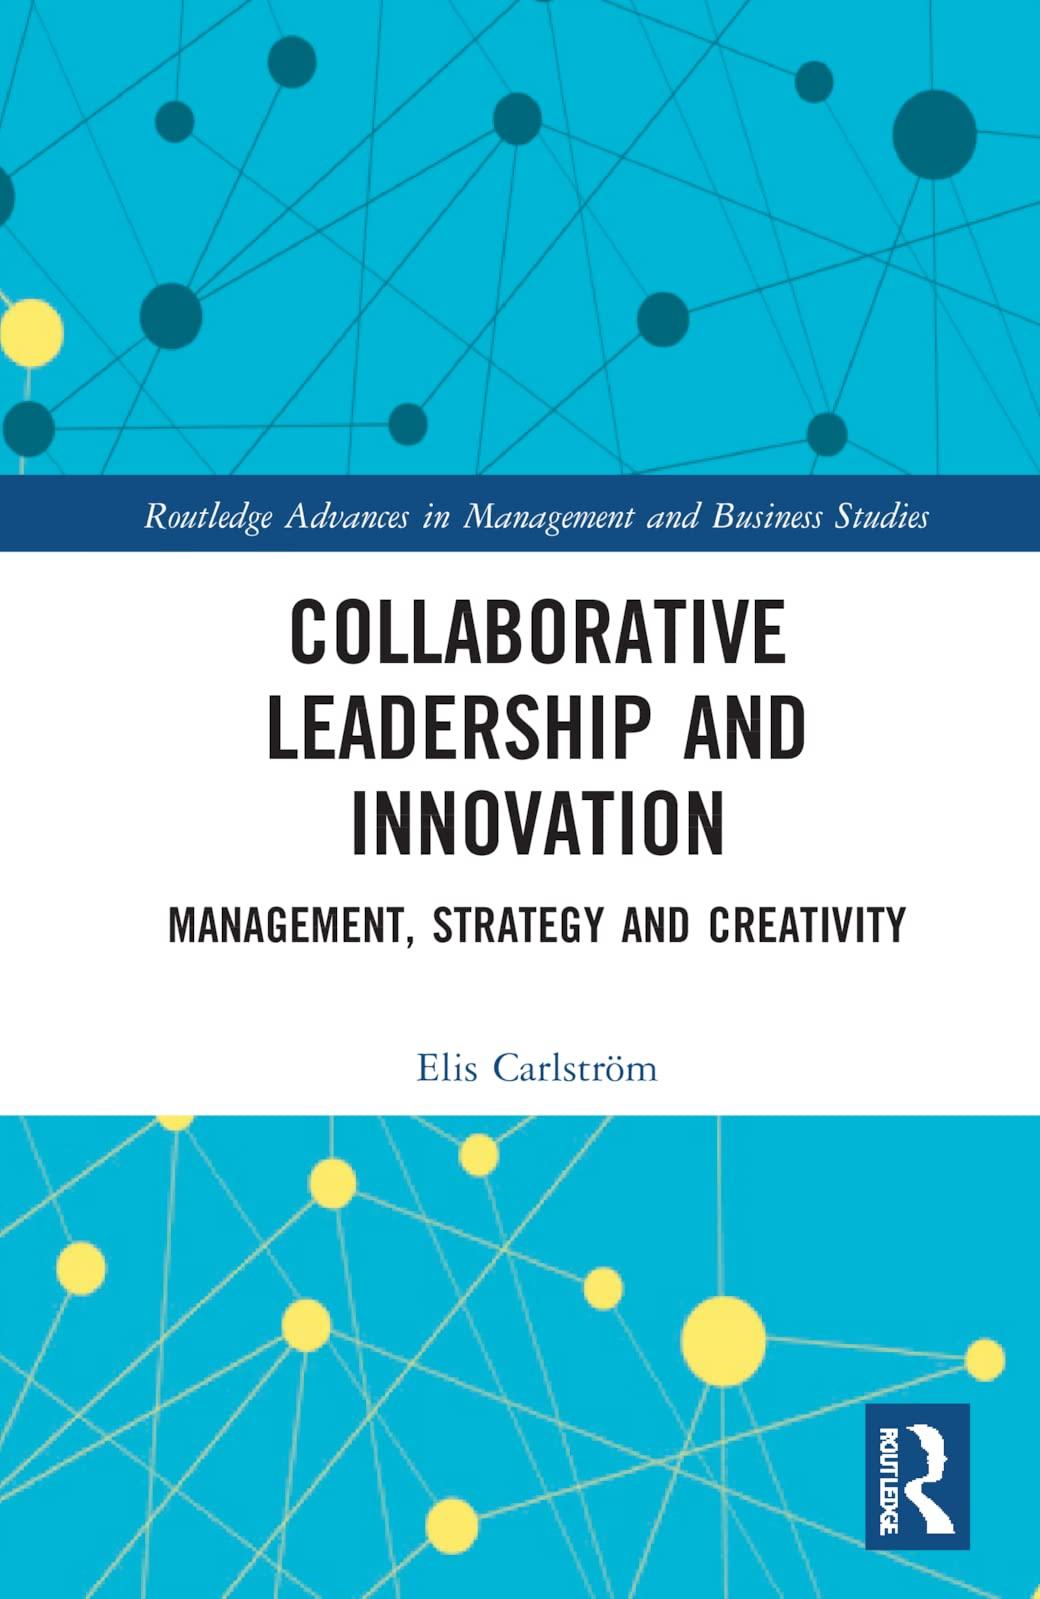 collaborative leadership and innovation routledge advances in management and business studies management